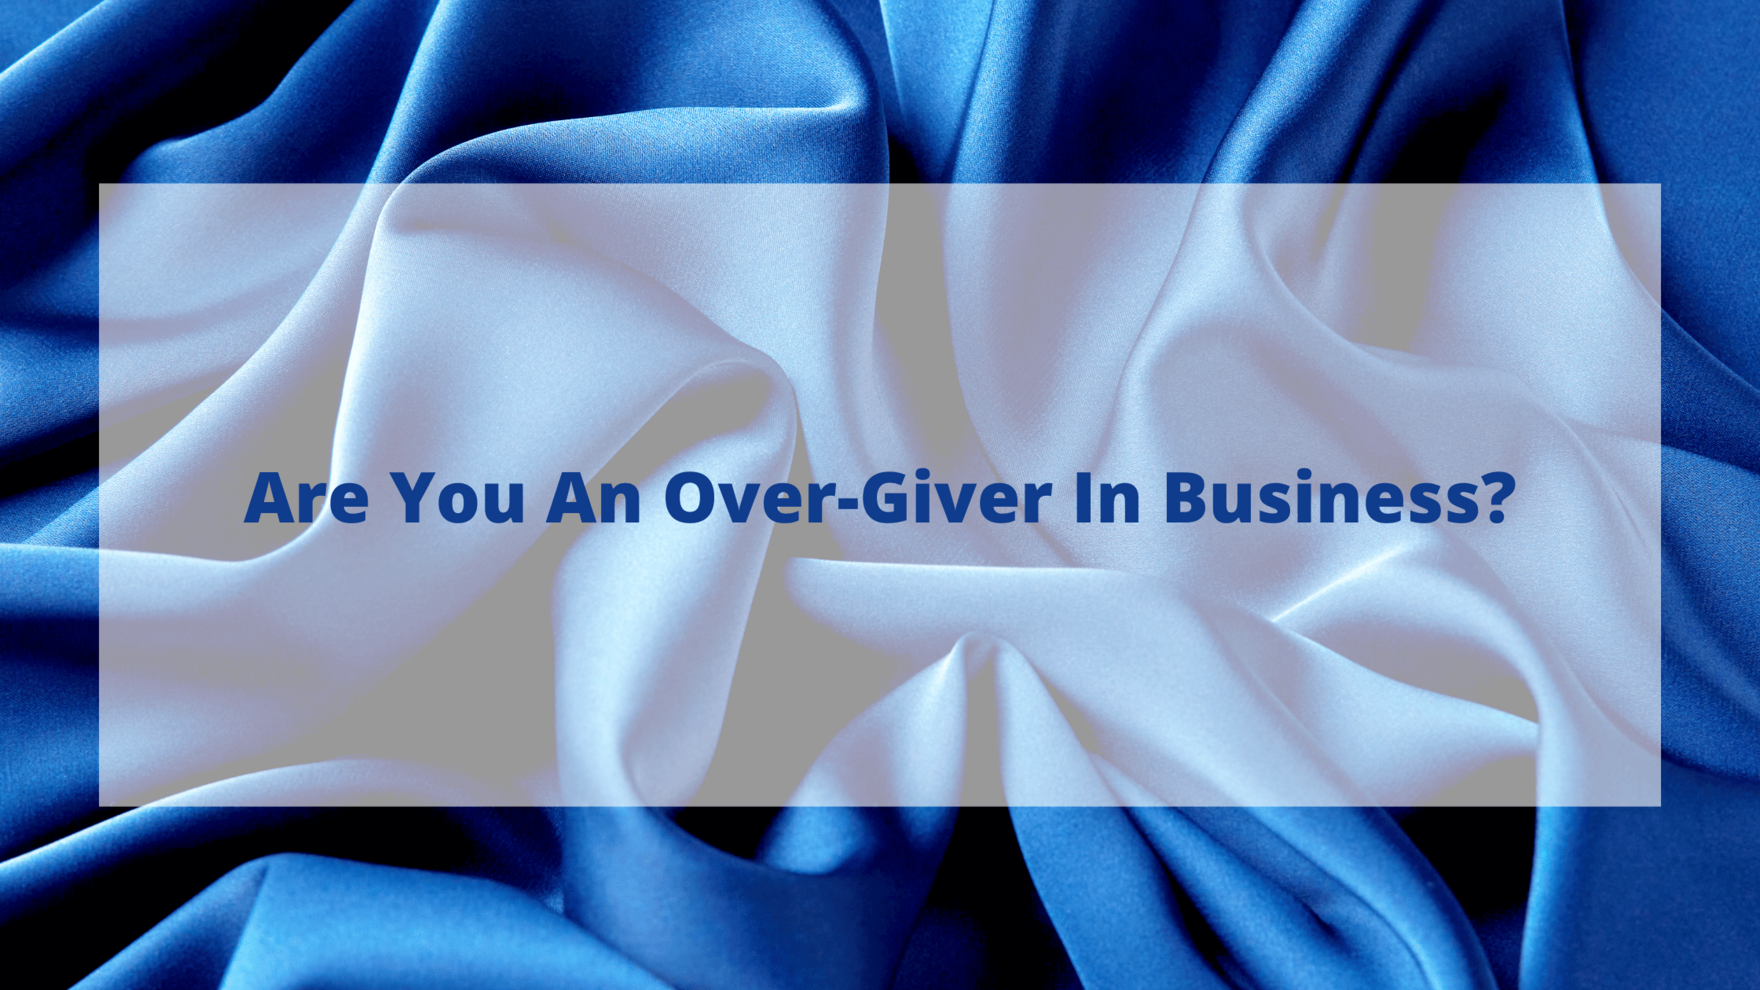 SMA Blog - Are You An Over-Giver In Business